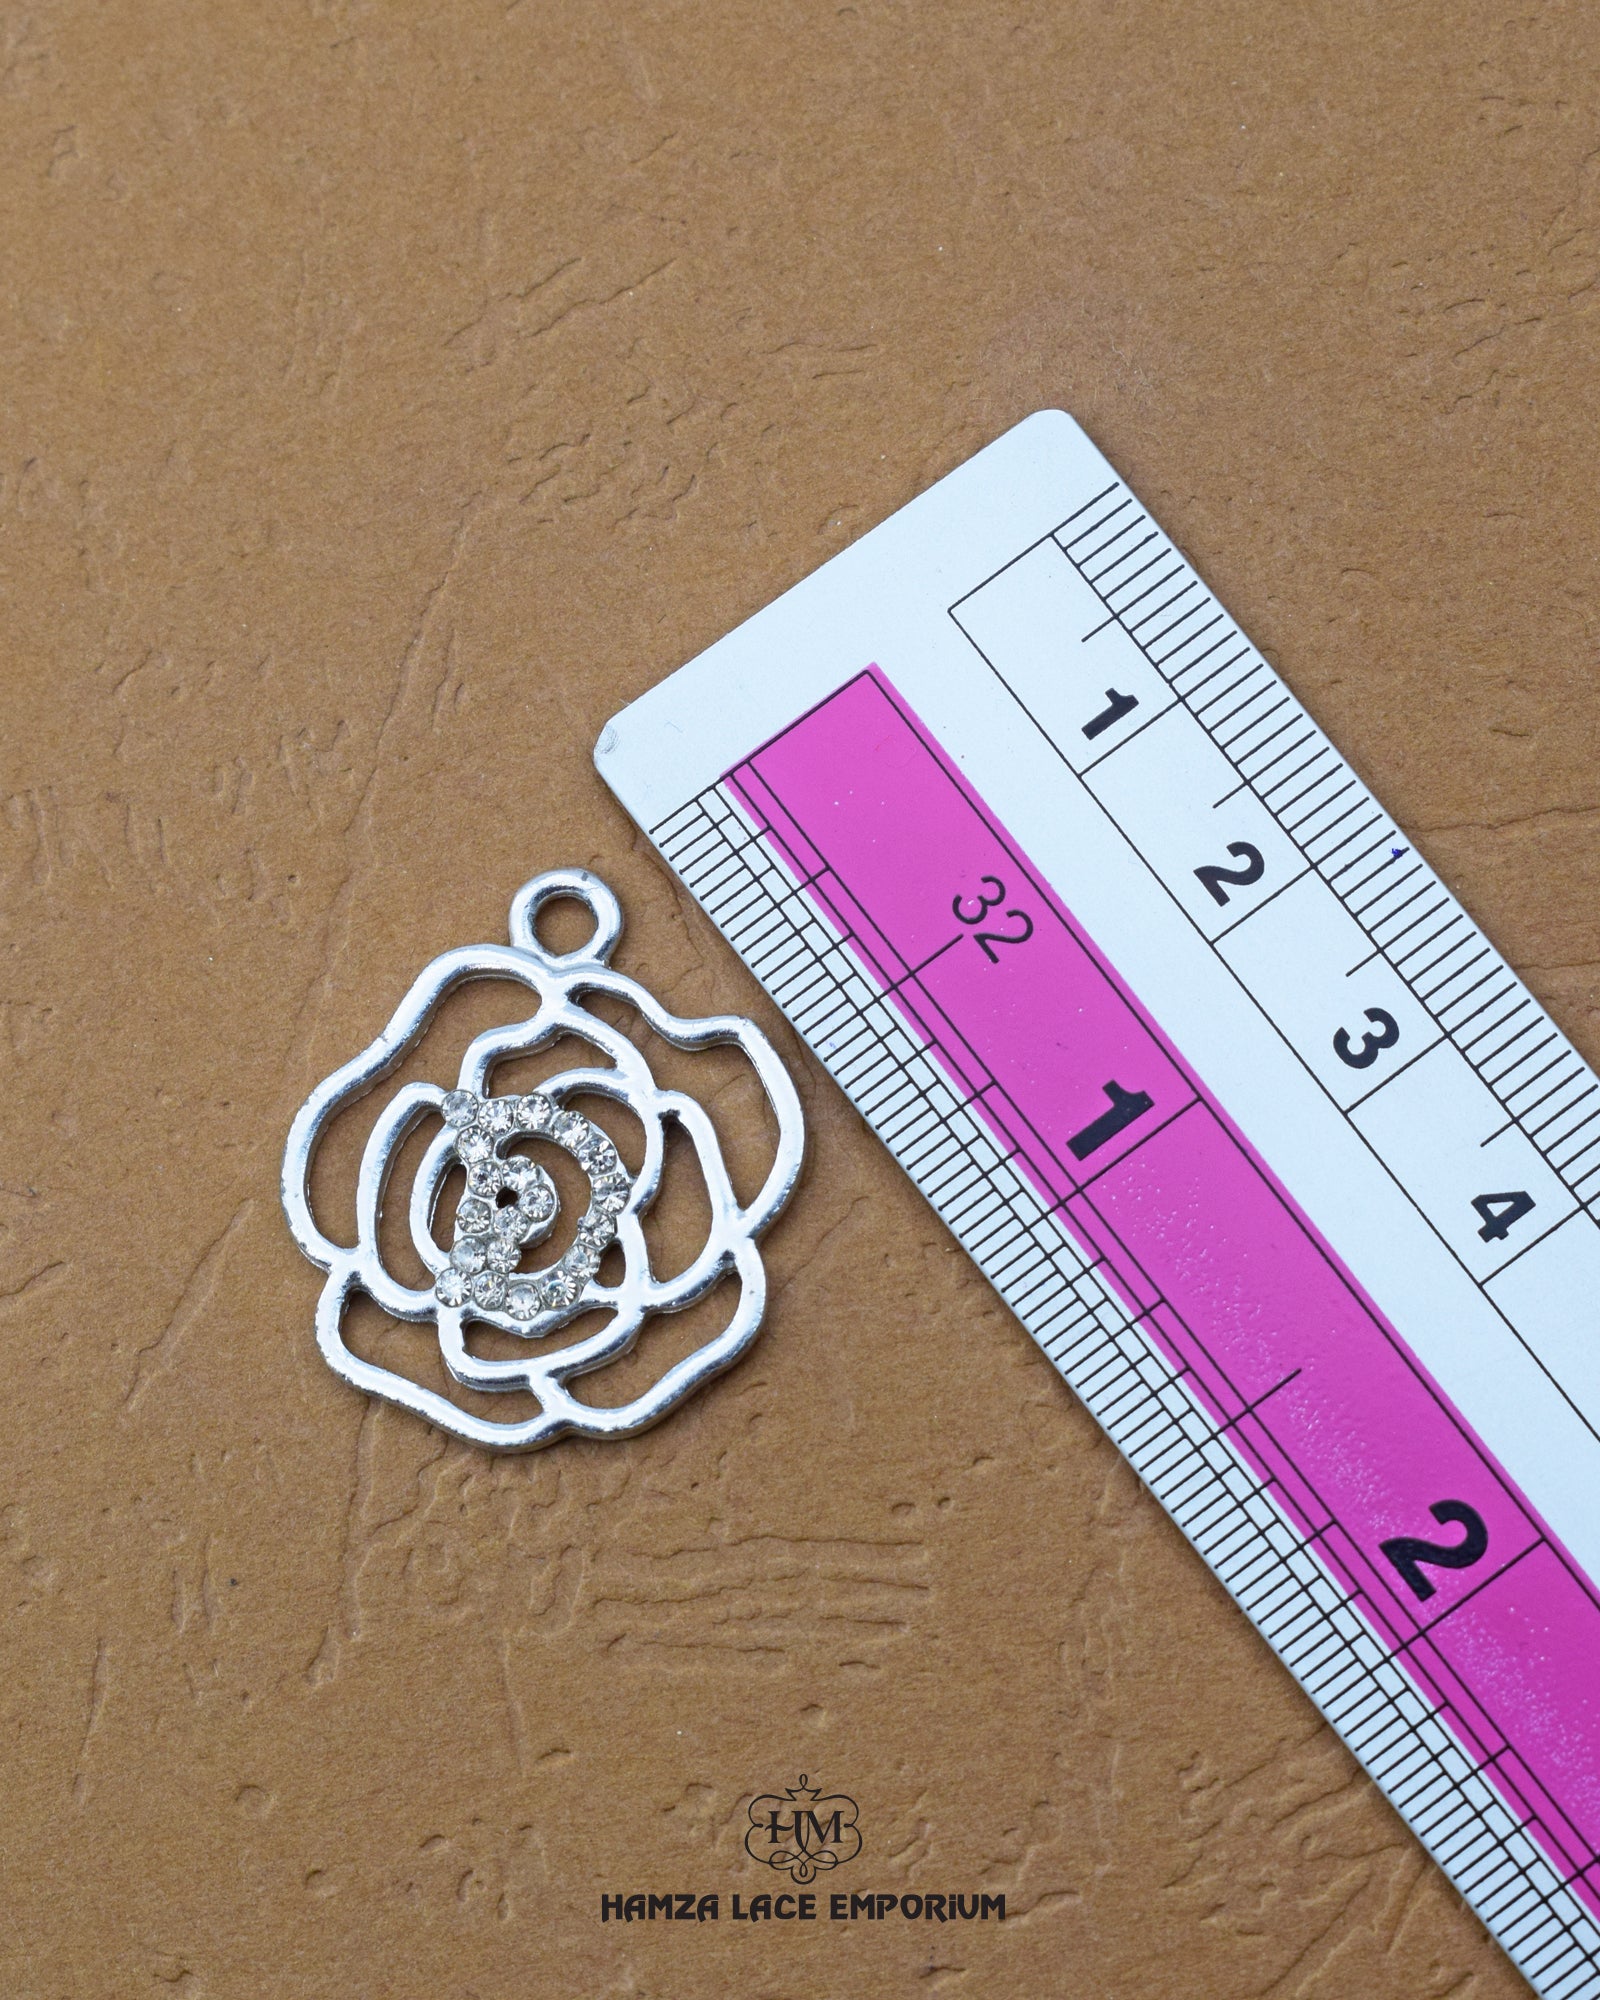 The size of the 'Hanging Flower Button 139FBC' is showcased alongside a helpful ruler to visualize and assess the product size accurately.